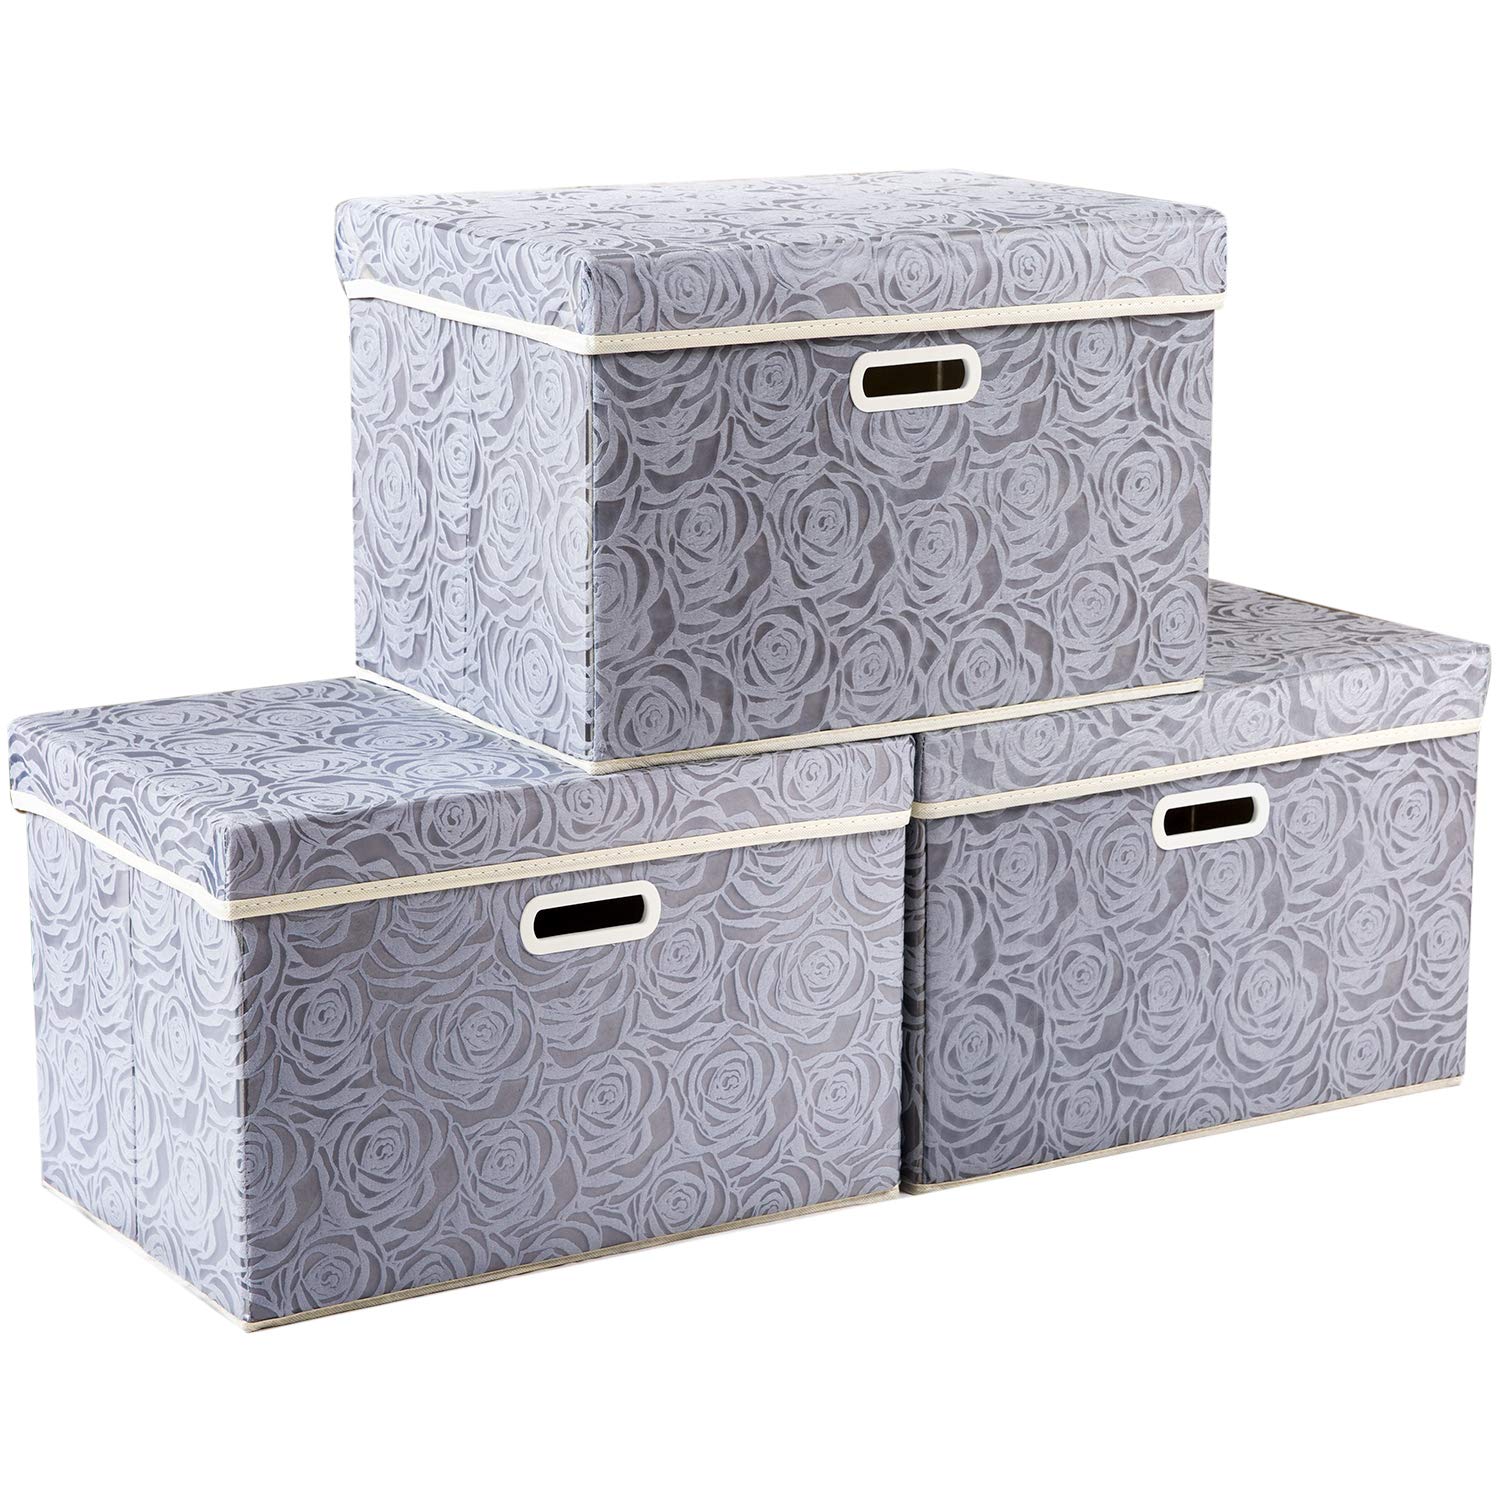 Buy SOGA 2X Grey Small Foldable Canvas Storage Box Cube Clothes Basket  Organiser Home Decorative Box at Barbeques Galore.